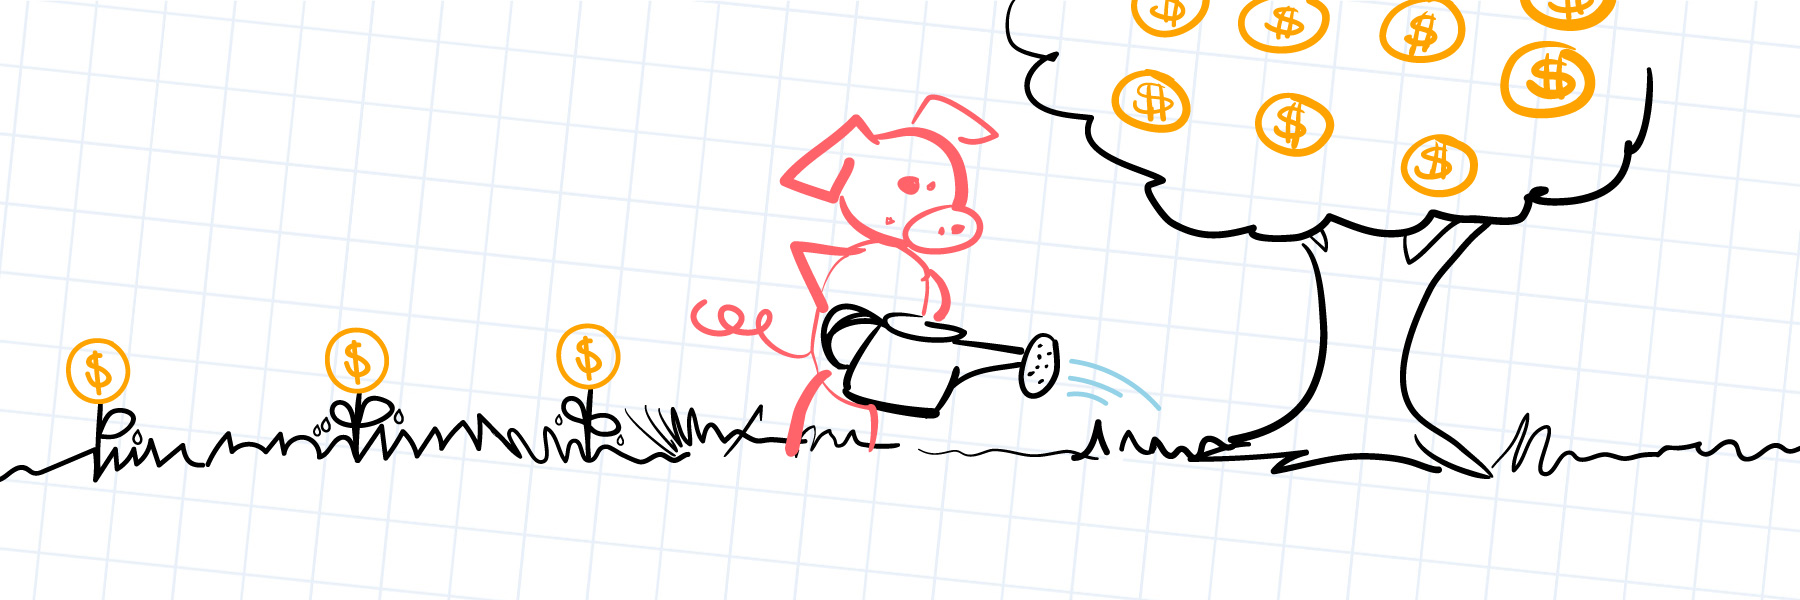 A pig watering a money tree, with little coin sprouts to the left of the pig.